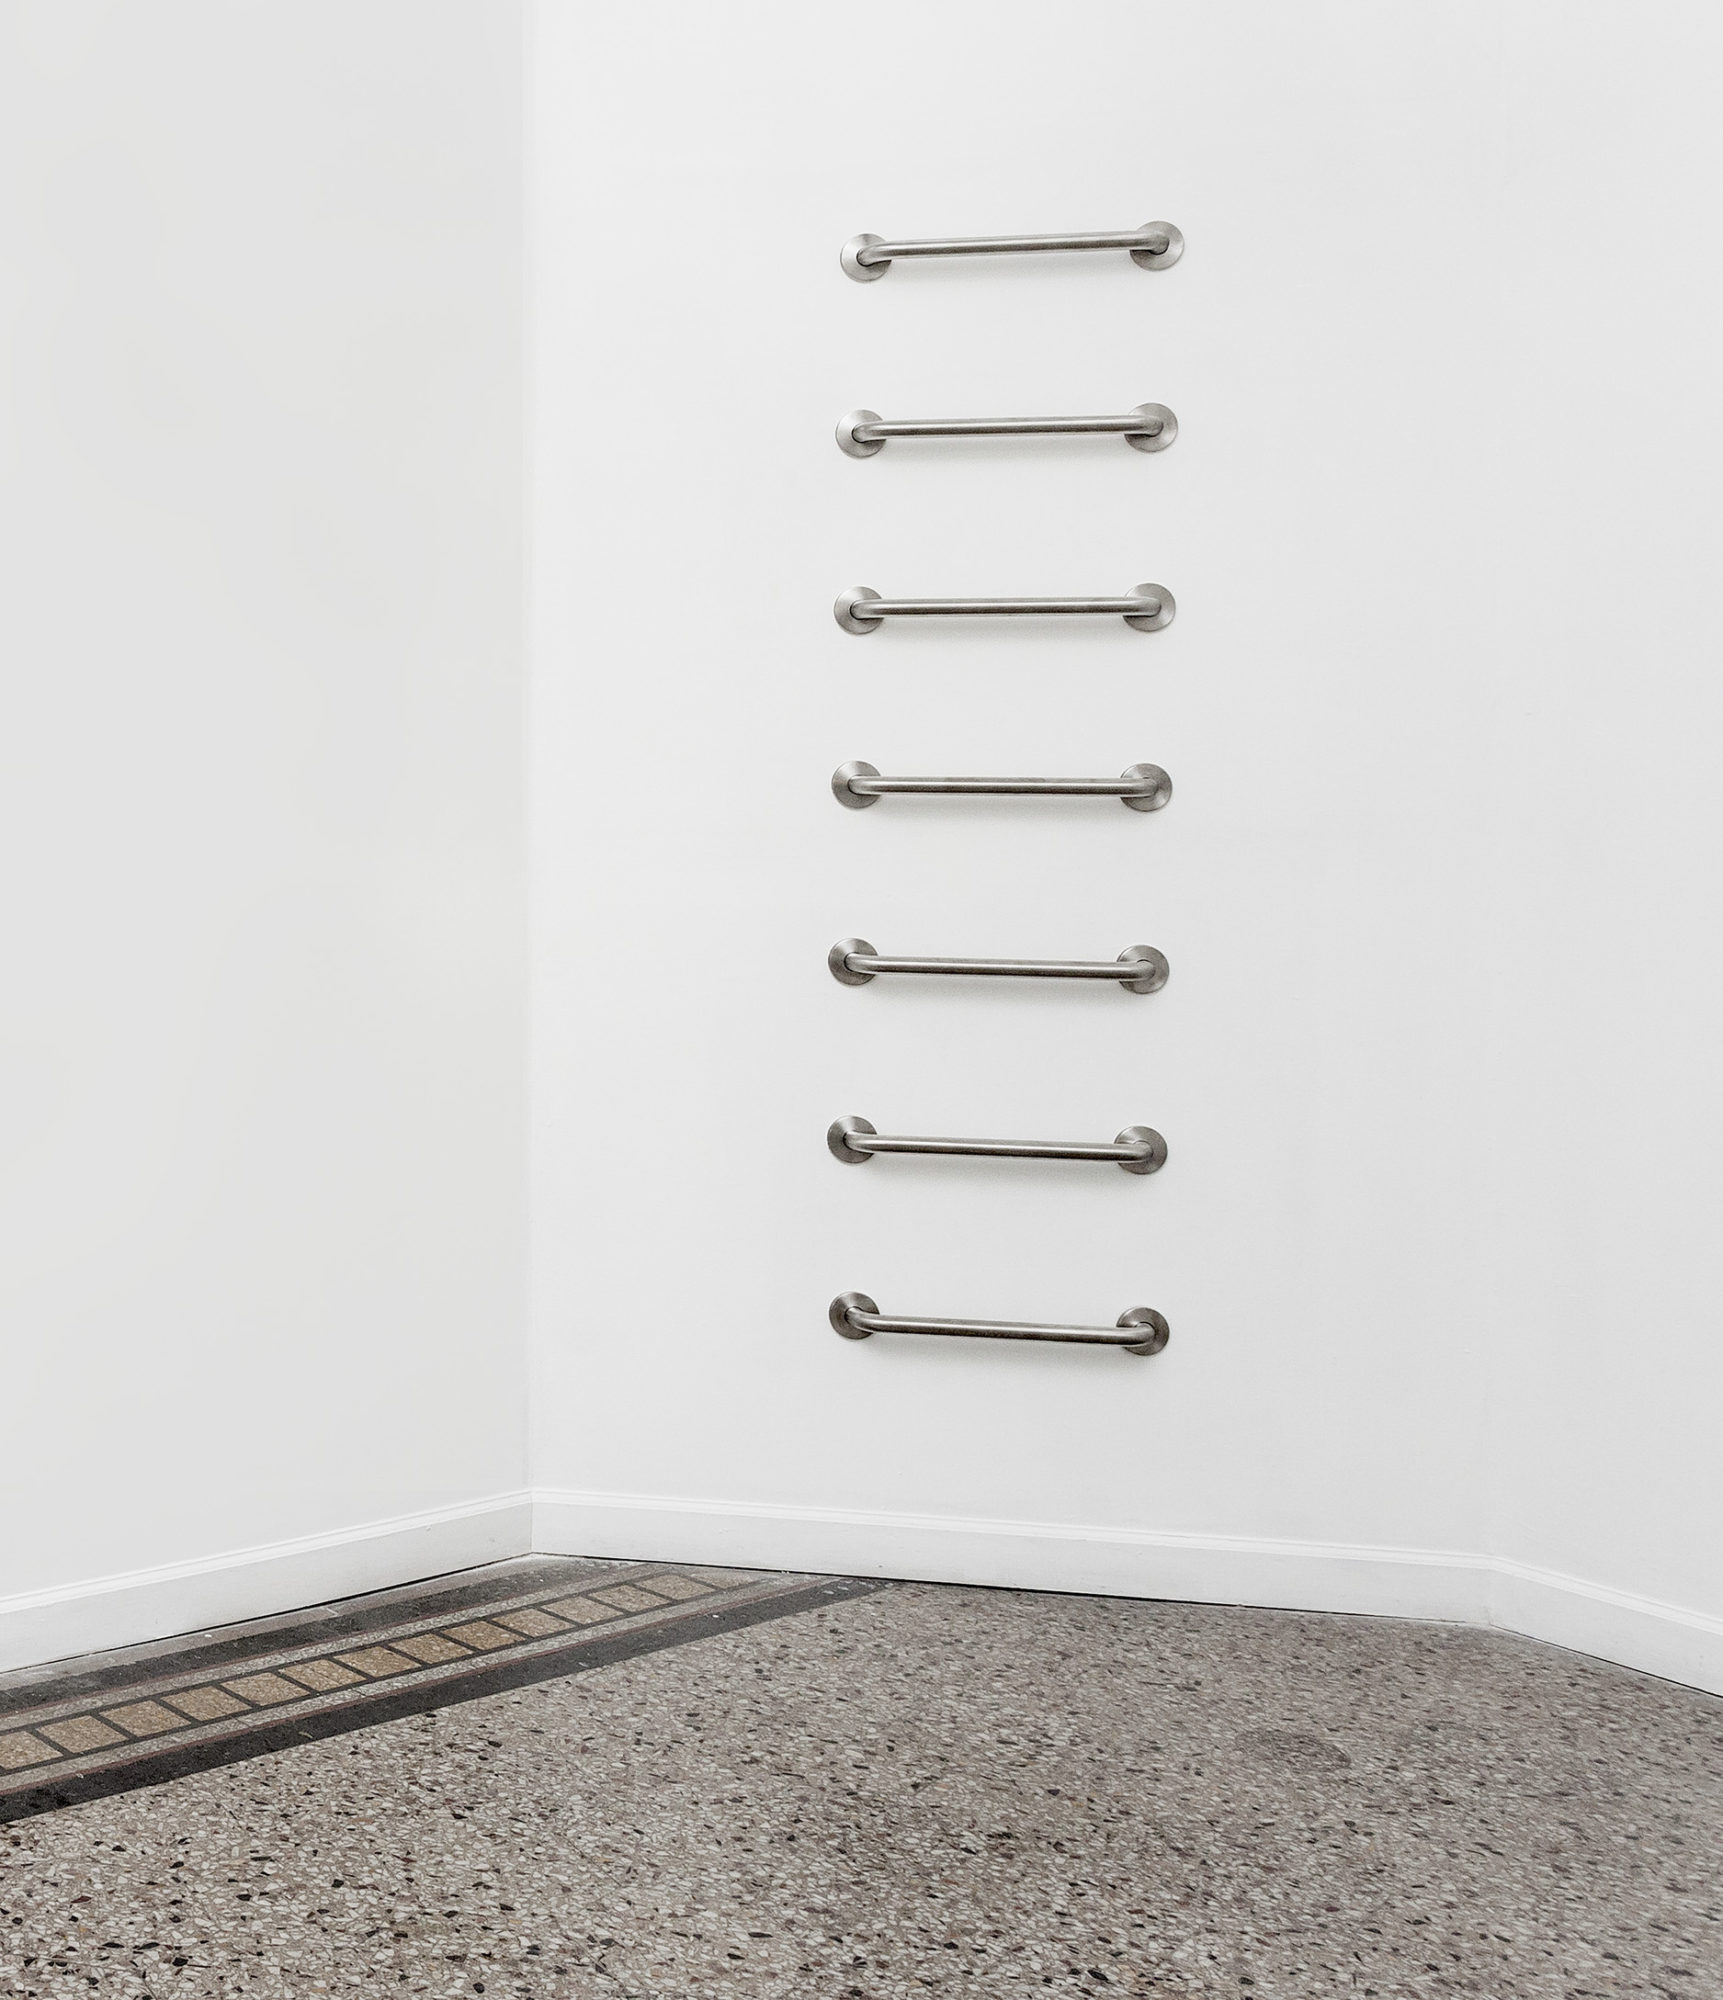 A vertical stack of horizontal metal grab bars is mounted on a gallery wall.